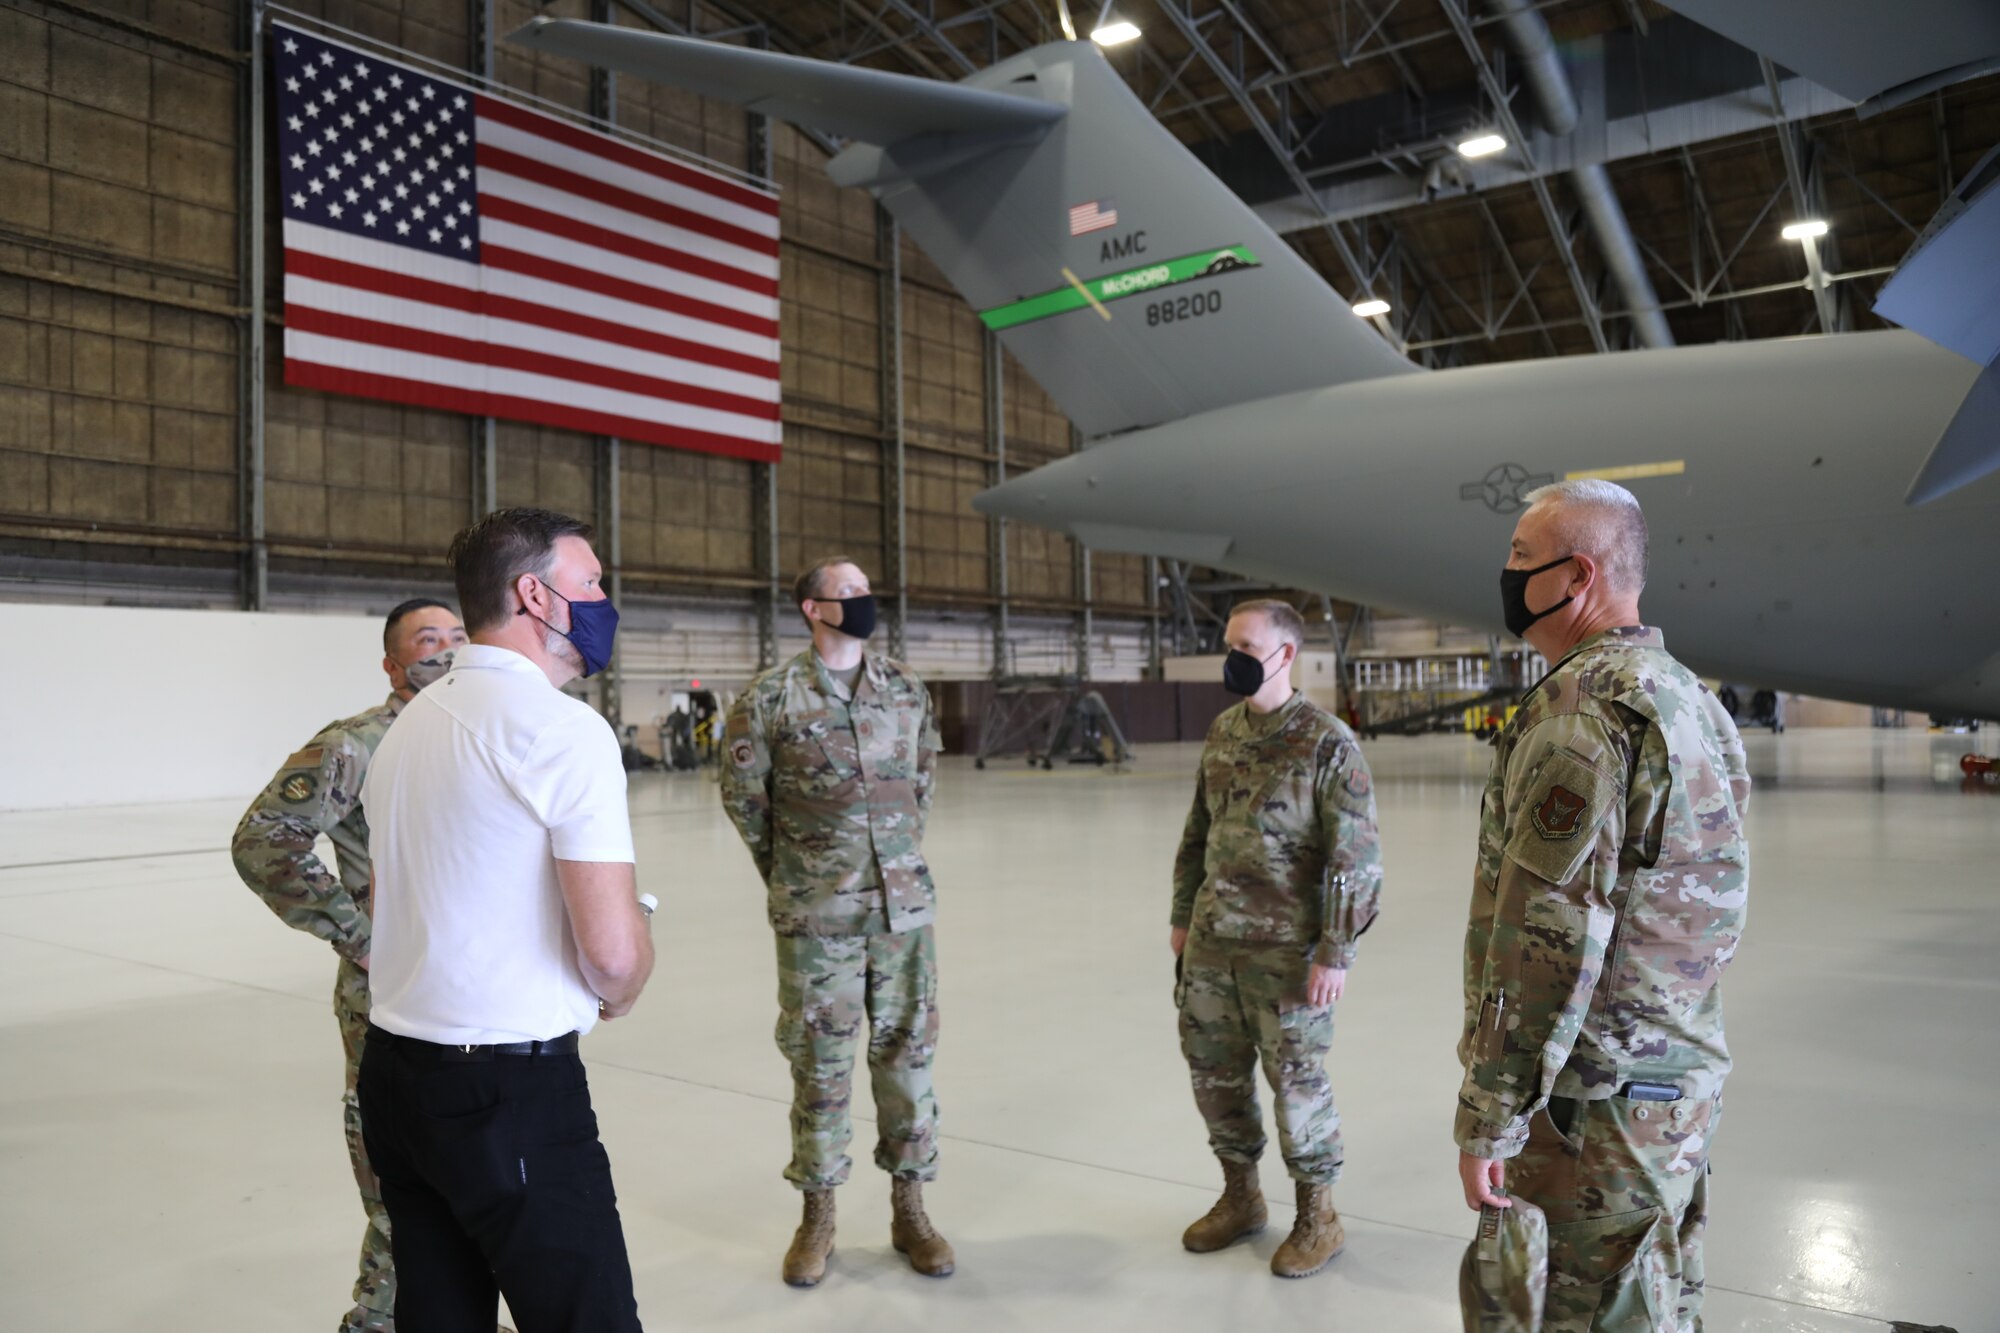 Members of the 446th Maintenance Group discuss C-17 Globemaster III aircraft specifications and maintenance with Mayor Andy Ryder, city of Lacey, Washington, during a visit to the 446th Airlift Wing on May 10, 2021 at Joint Base Lewis-McChord.